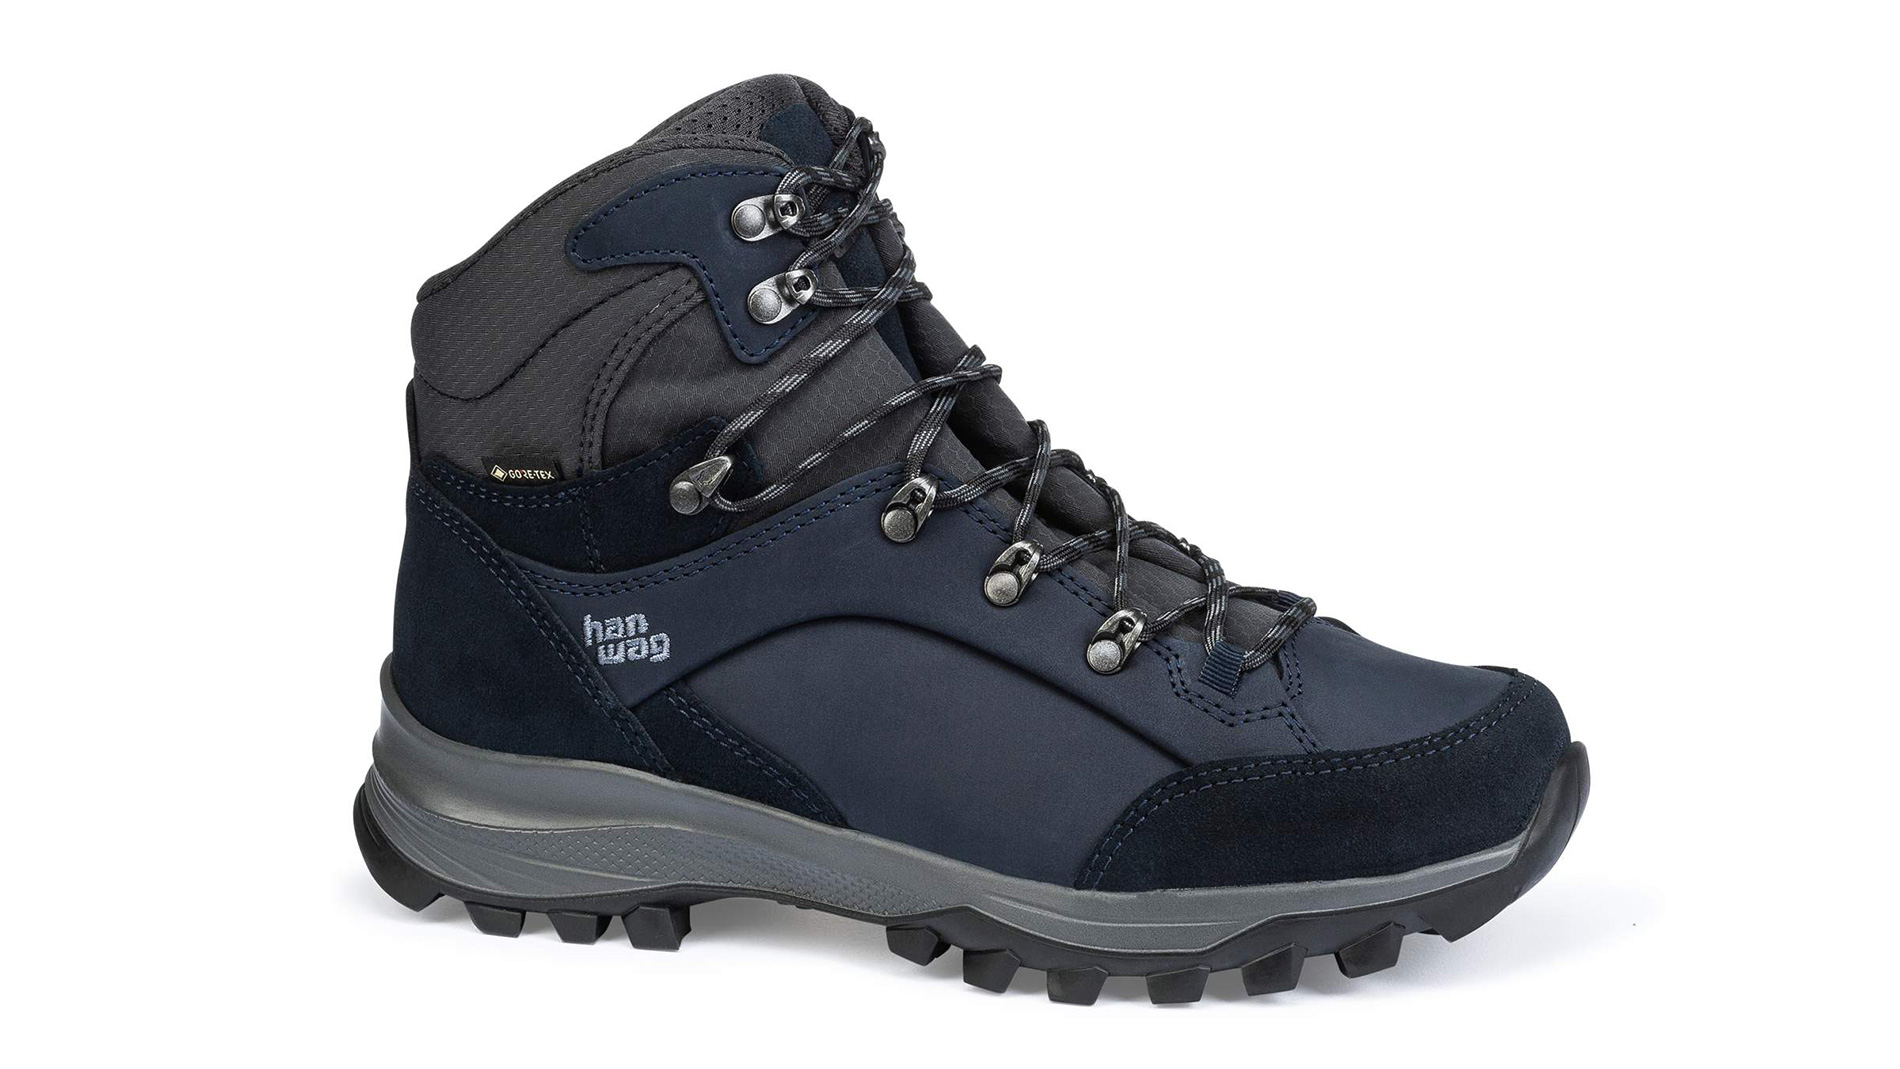 Best women's hiking boots 2021 walking boots to take on any terrain T3